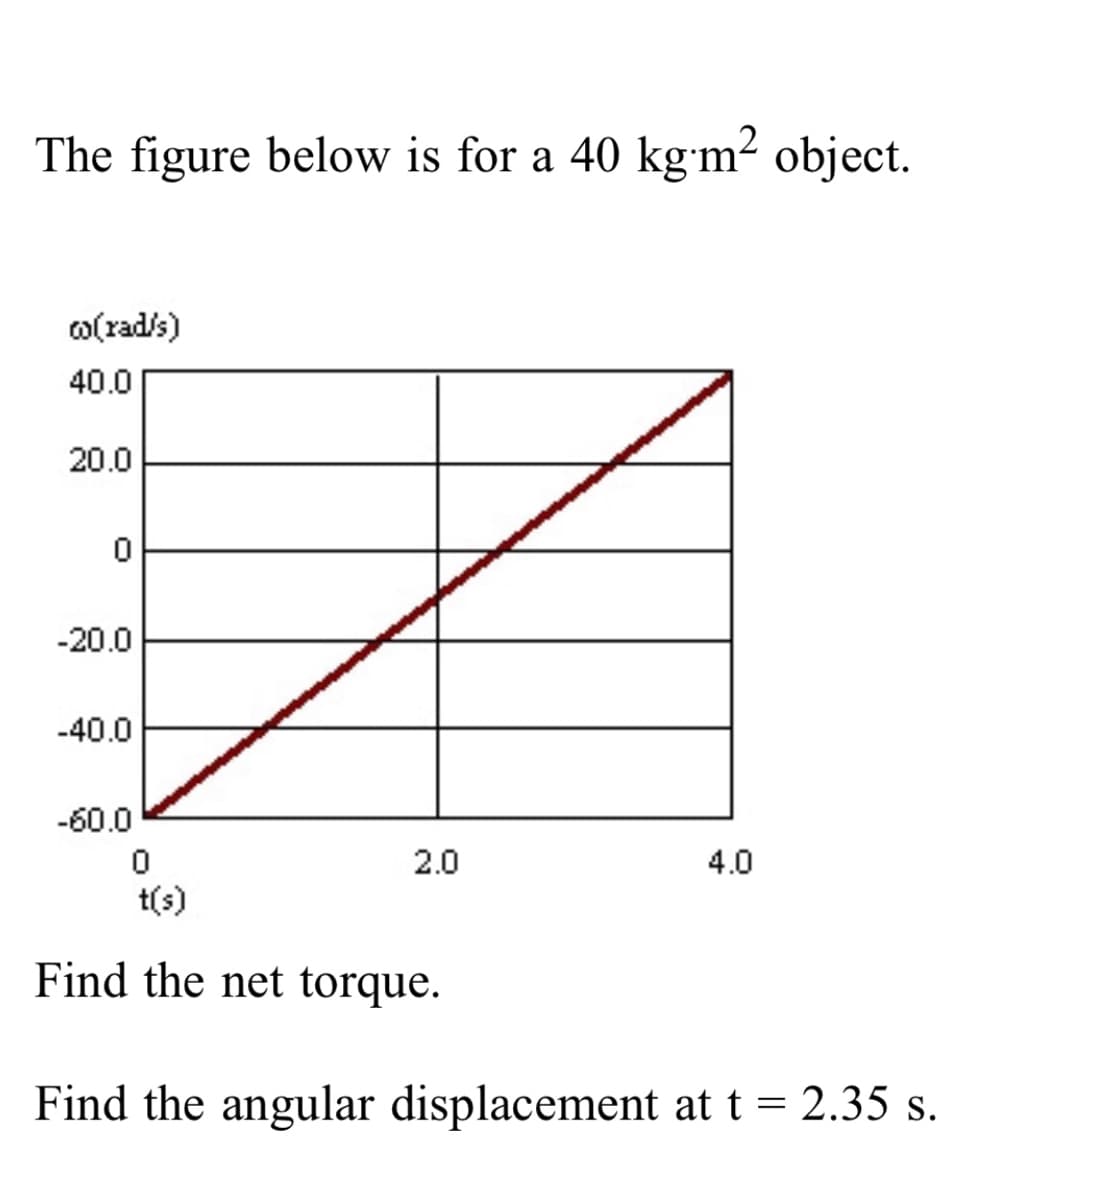 The figure below is for a 40 kgm? object.
o(rad/s)
40.0
20.0
-20.0
-40.0
-60.0
2.0
4.0
t(s)
Find the net torque.
Find the angular displacement at t = 2.35 s.
